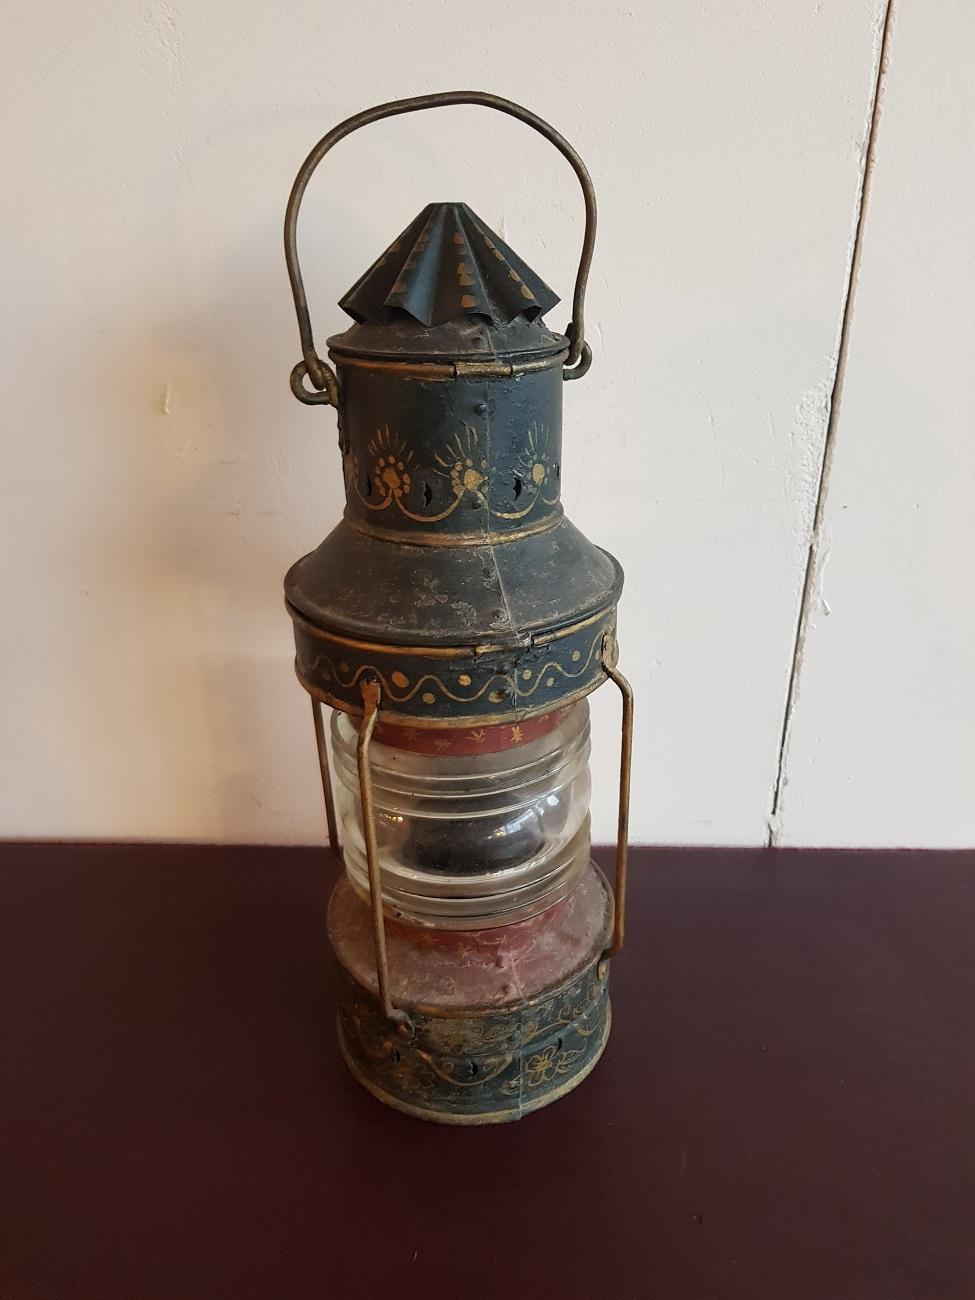 Hand-Painted Dutch Hand Painted Metal Anchor Light from circa 1900